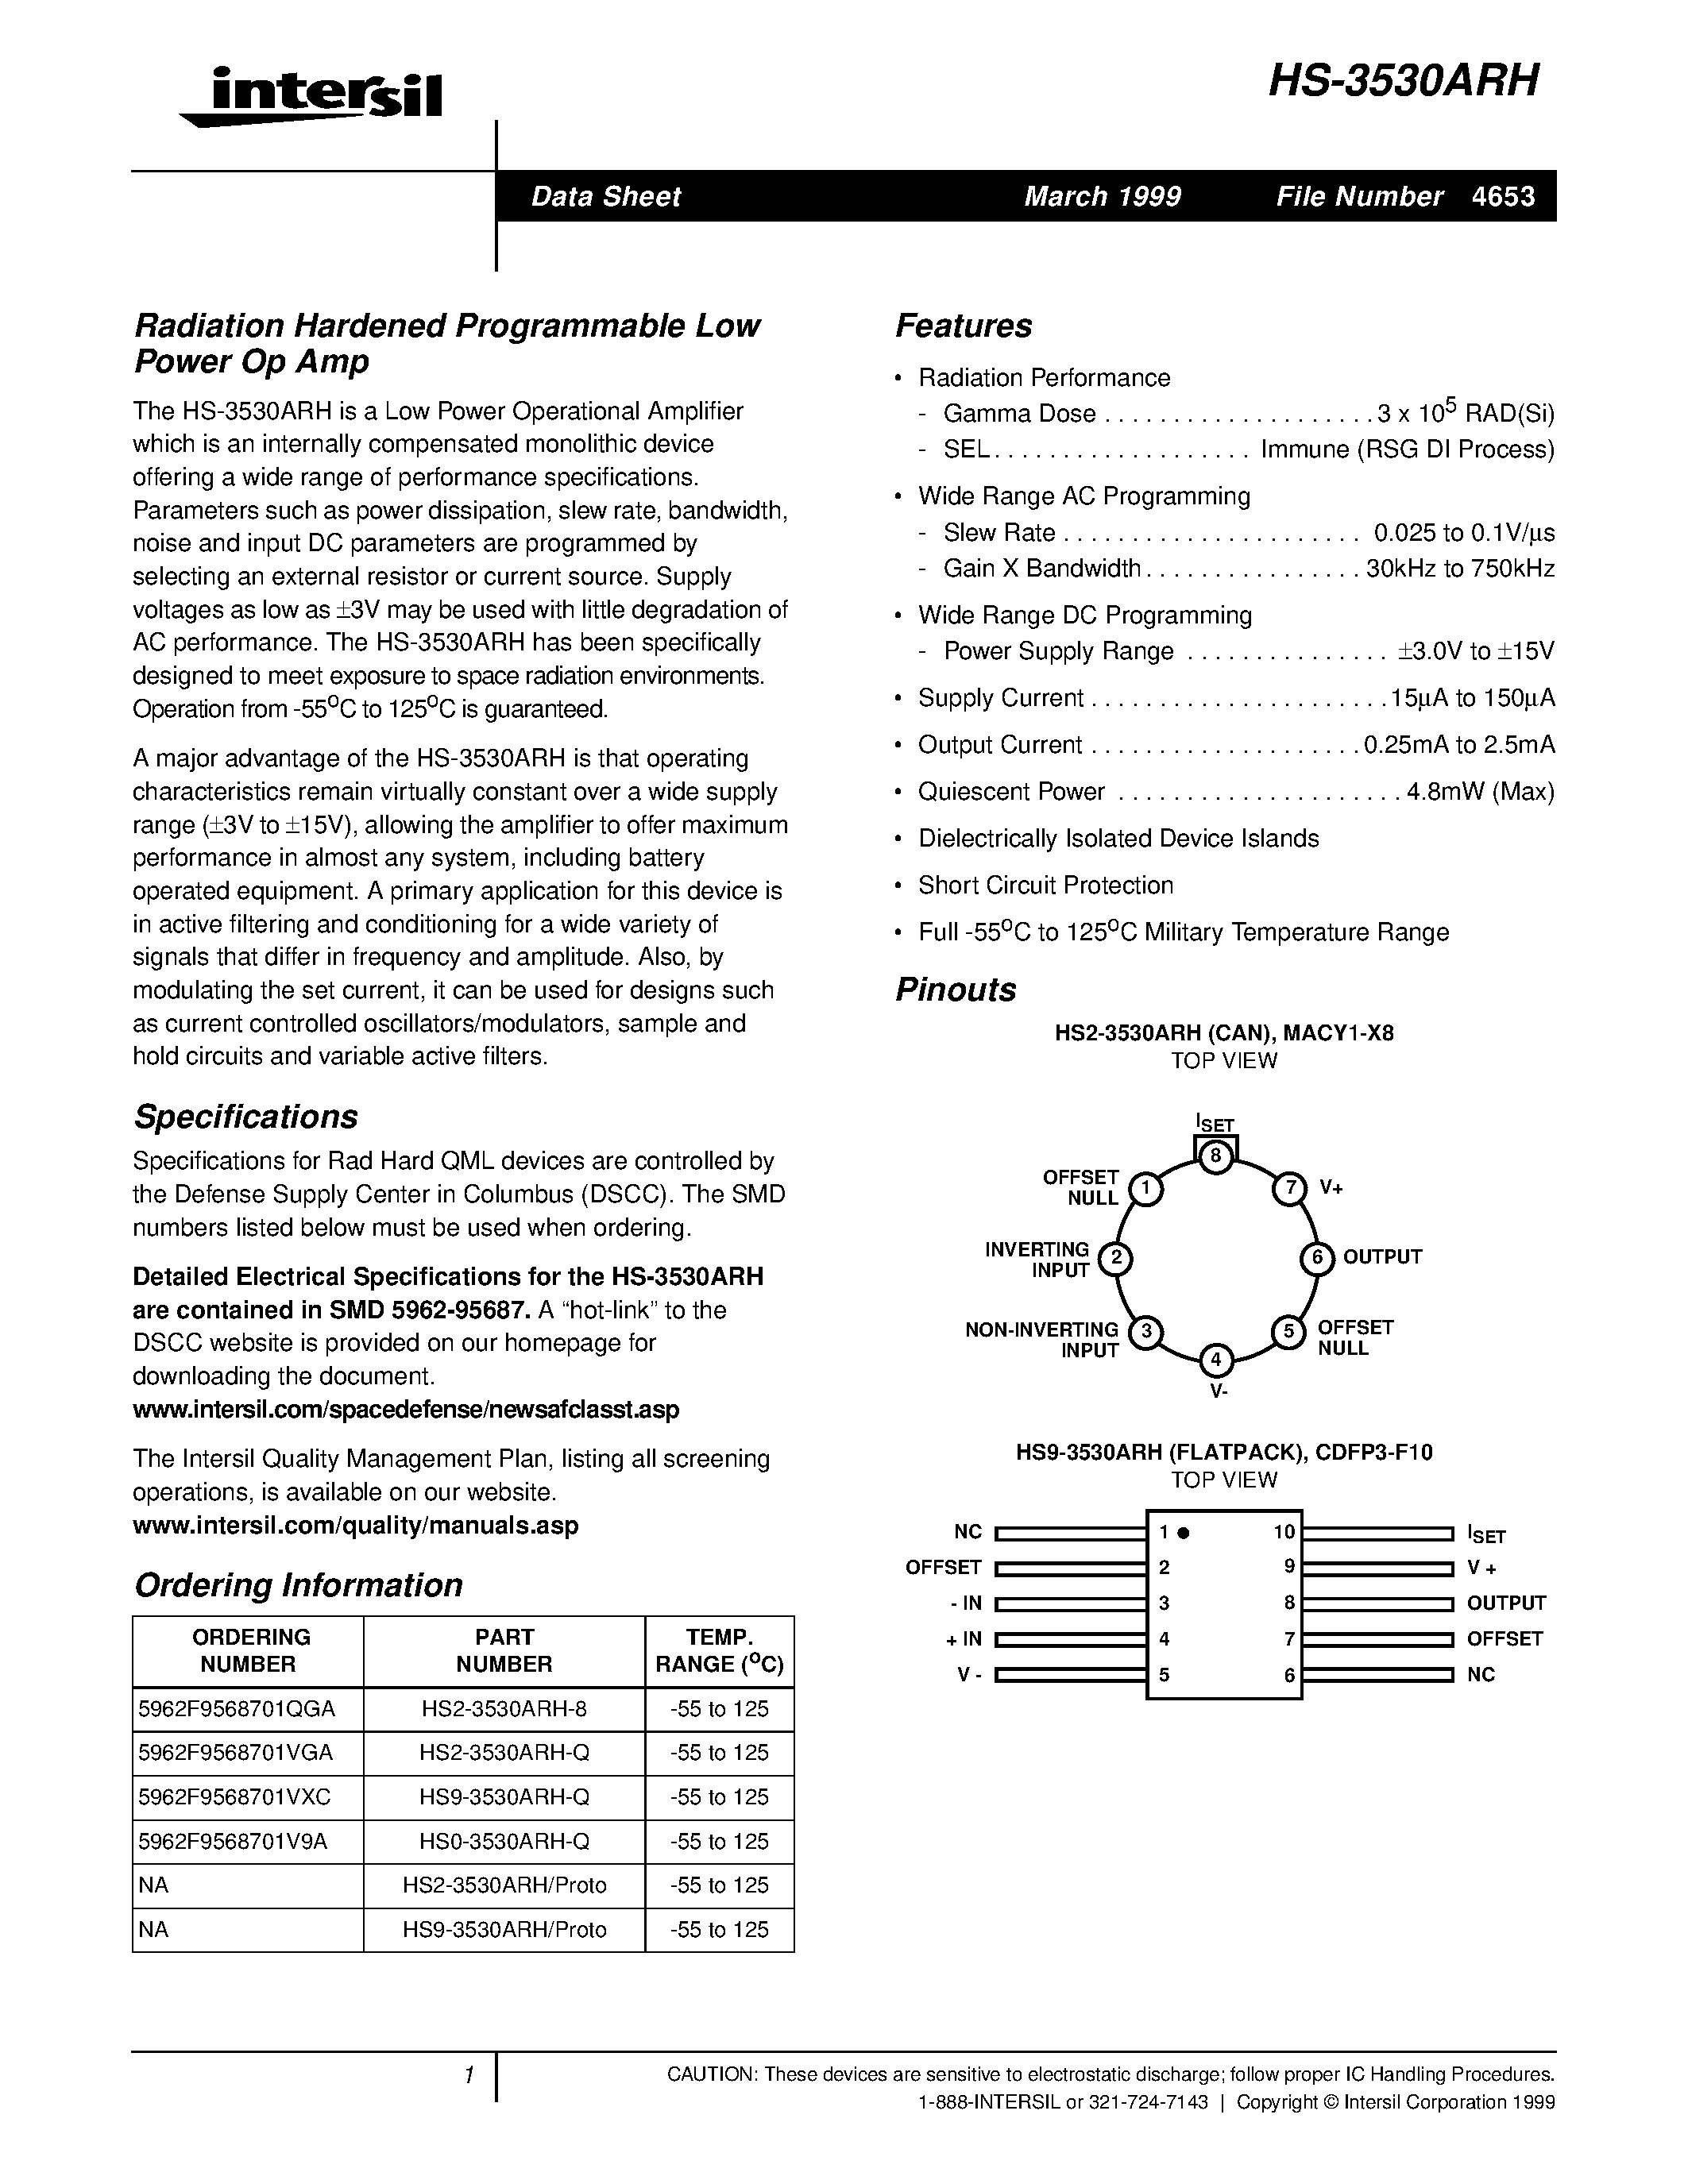 Datasheet HS0-3530ARH-Q - Radiation Hardened Programmable Low Power Op Amp page 1